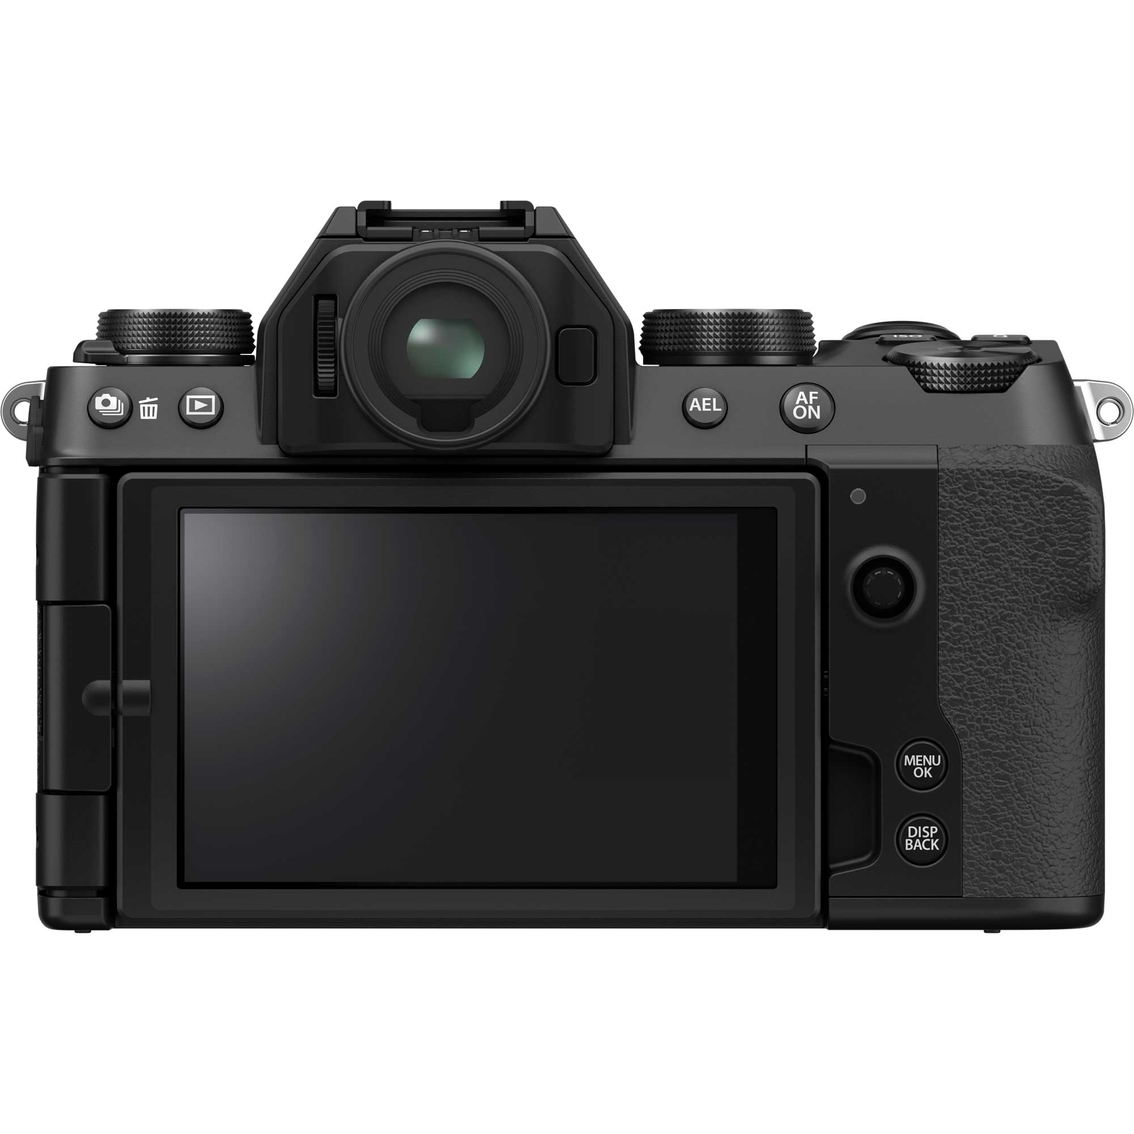 FujiFilm X S10 Body with XF 18 to 55mm Lens Kit, Black - Image 4 of 10